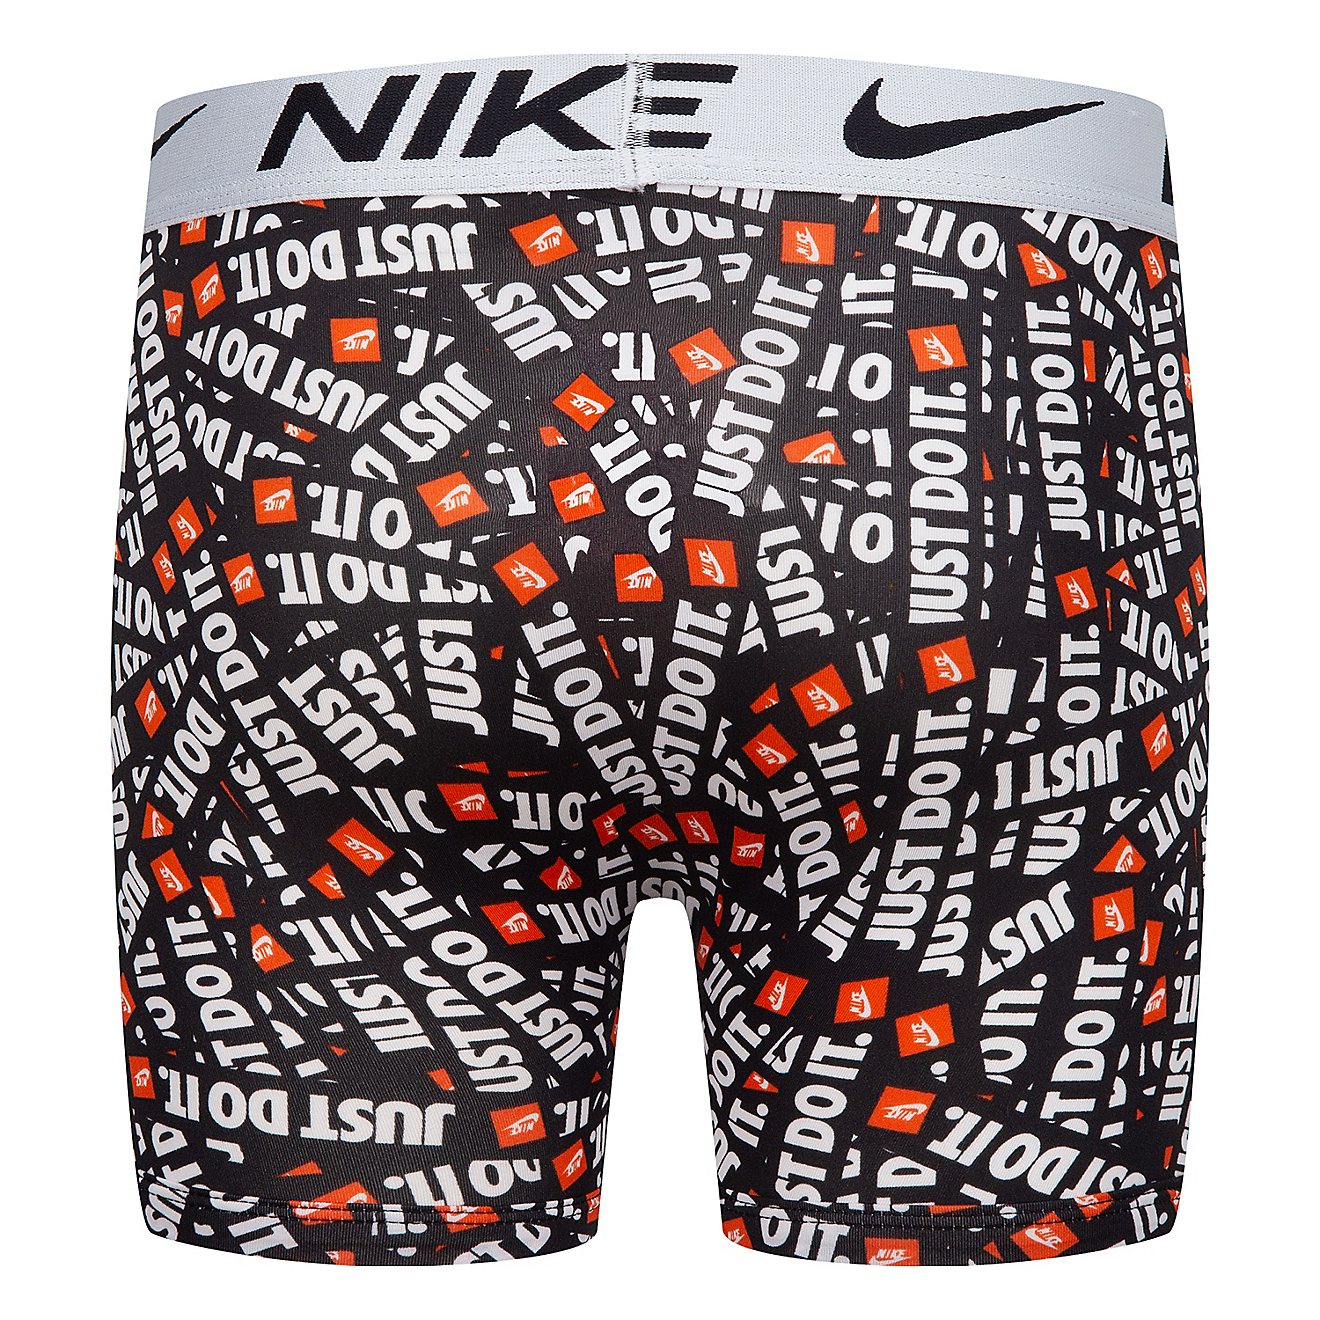 Nike Boys' Print Boxer Briefs 3-Pack | Free Shipping at Academy